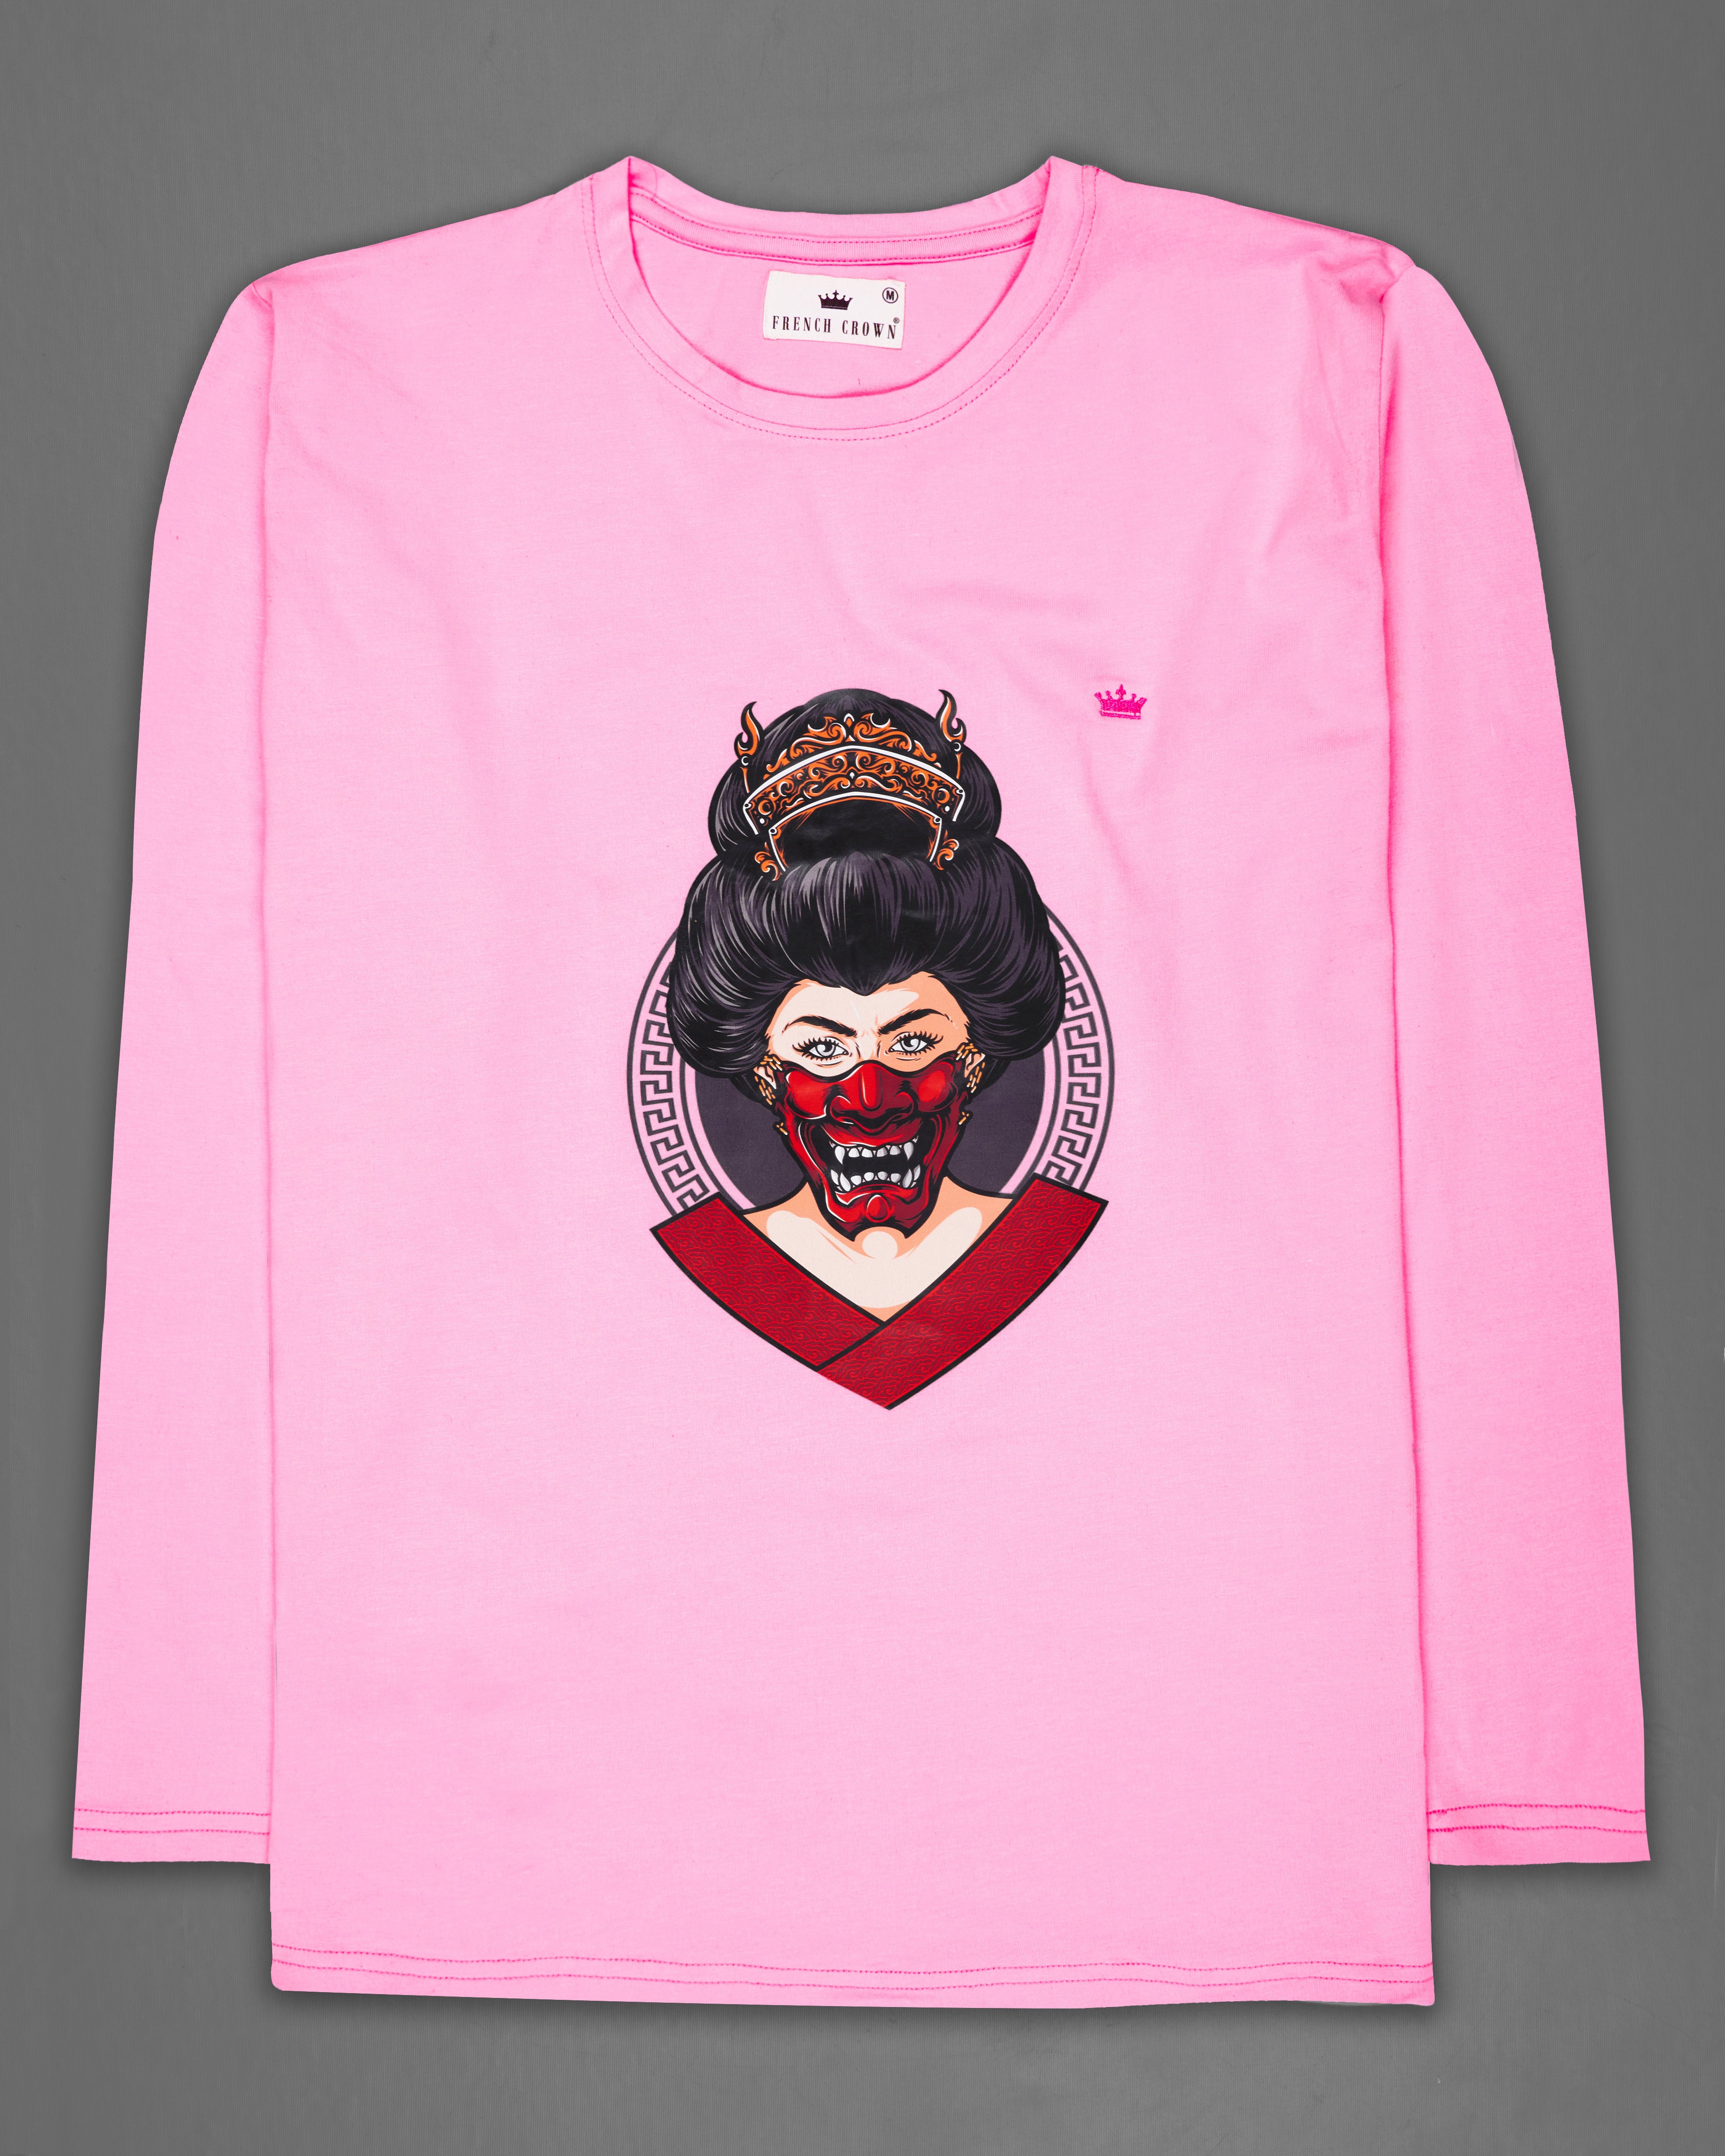 Oyster Pink Rubber Printed Premium Cotton T-Shirt TS296-W01-S, TS296-W01-M, TS296-W01-L, TS296-W01-XL, TS296-W01-XXL